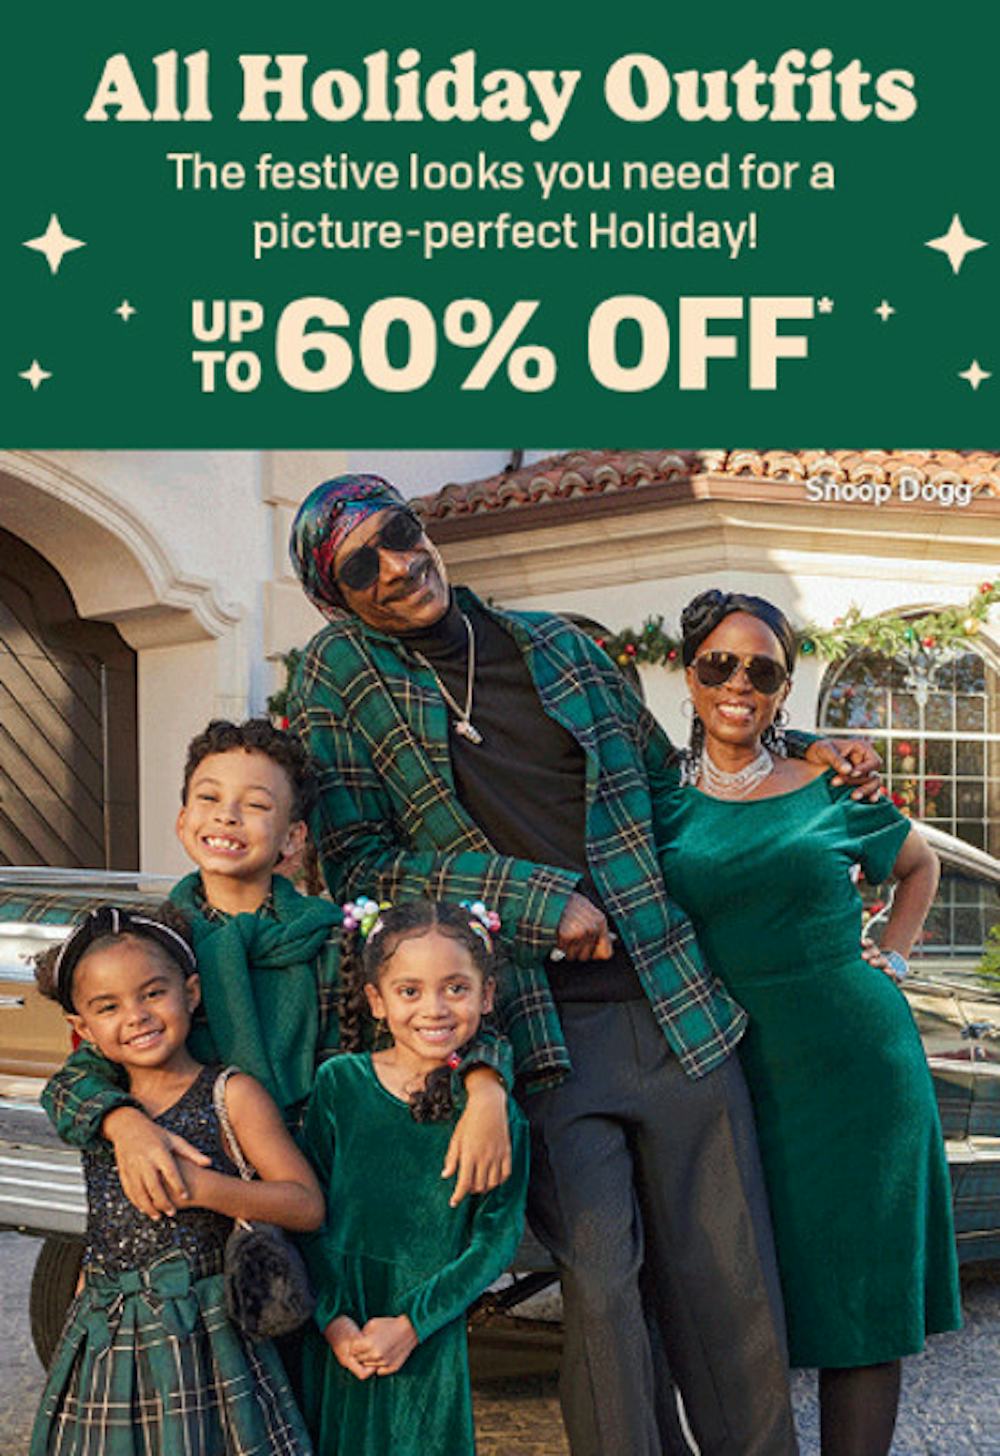 All Holiday Outfits Up to 60% Off